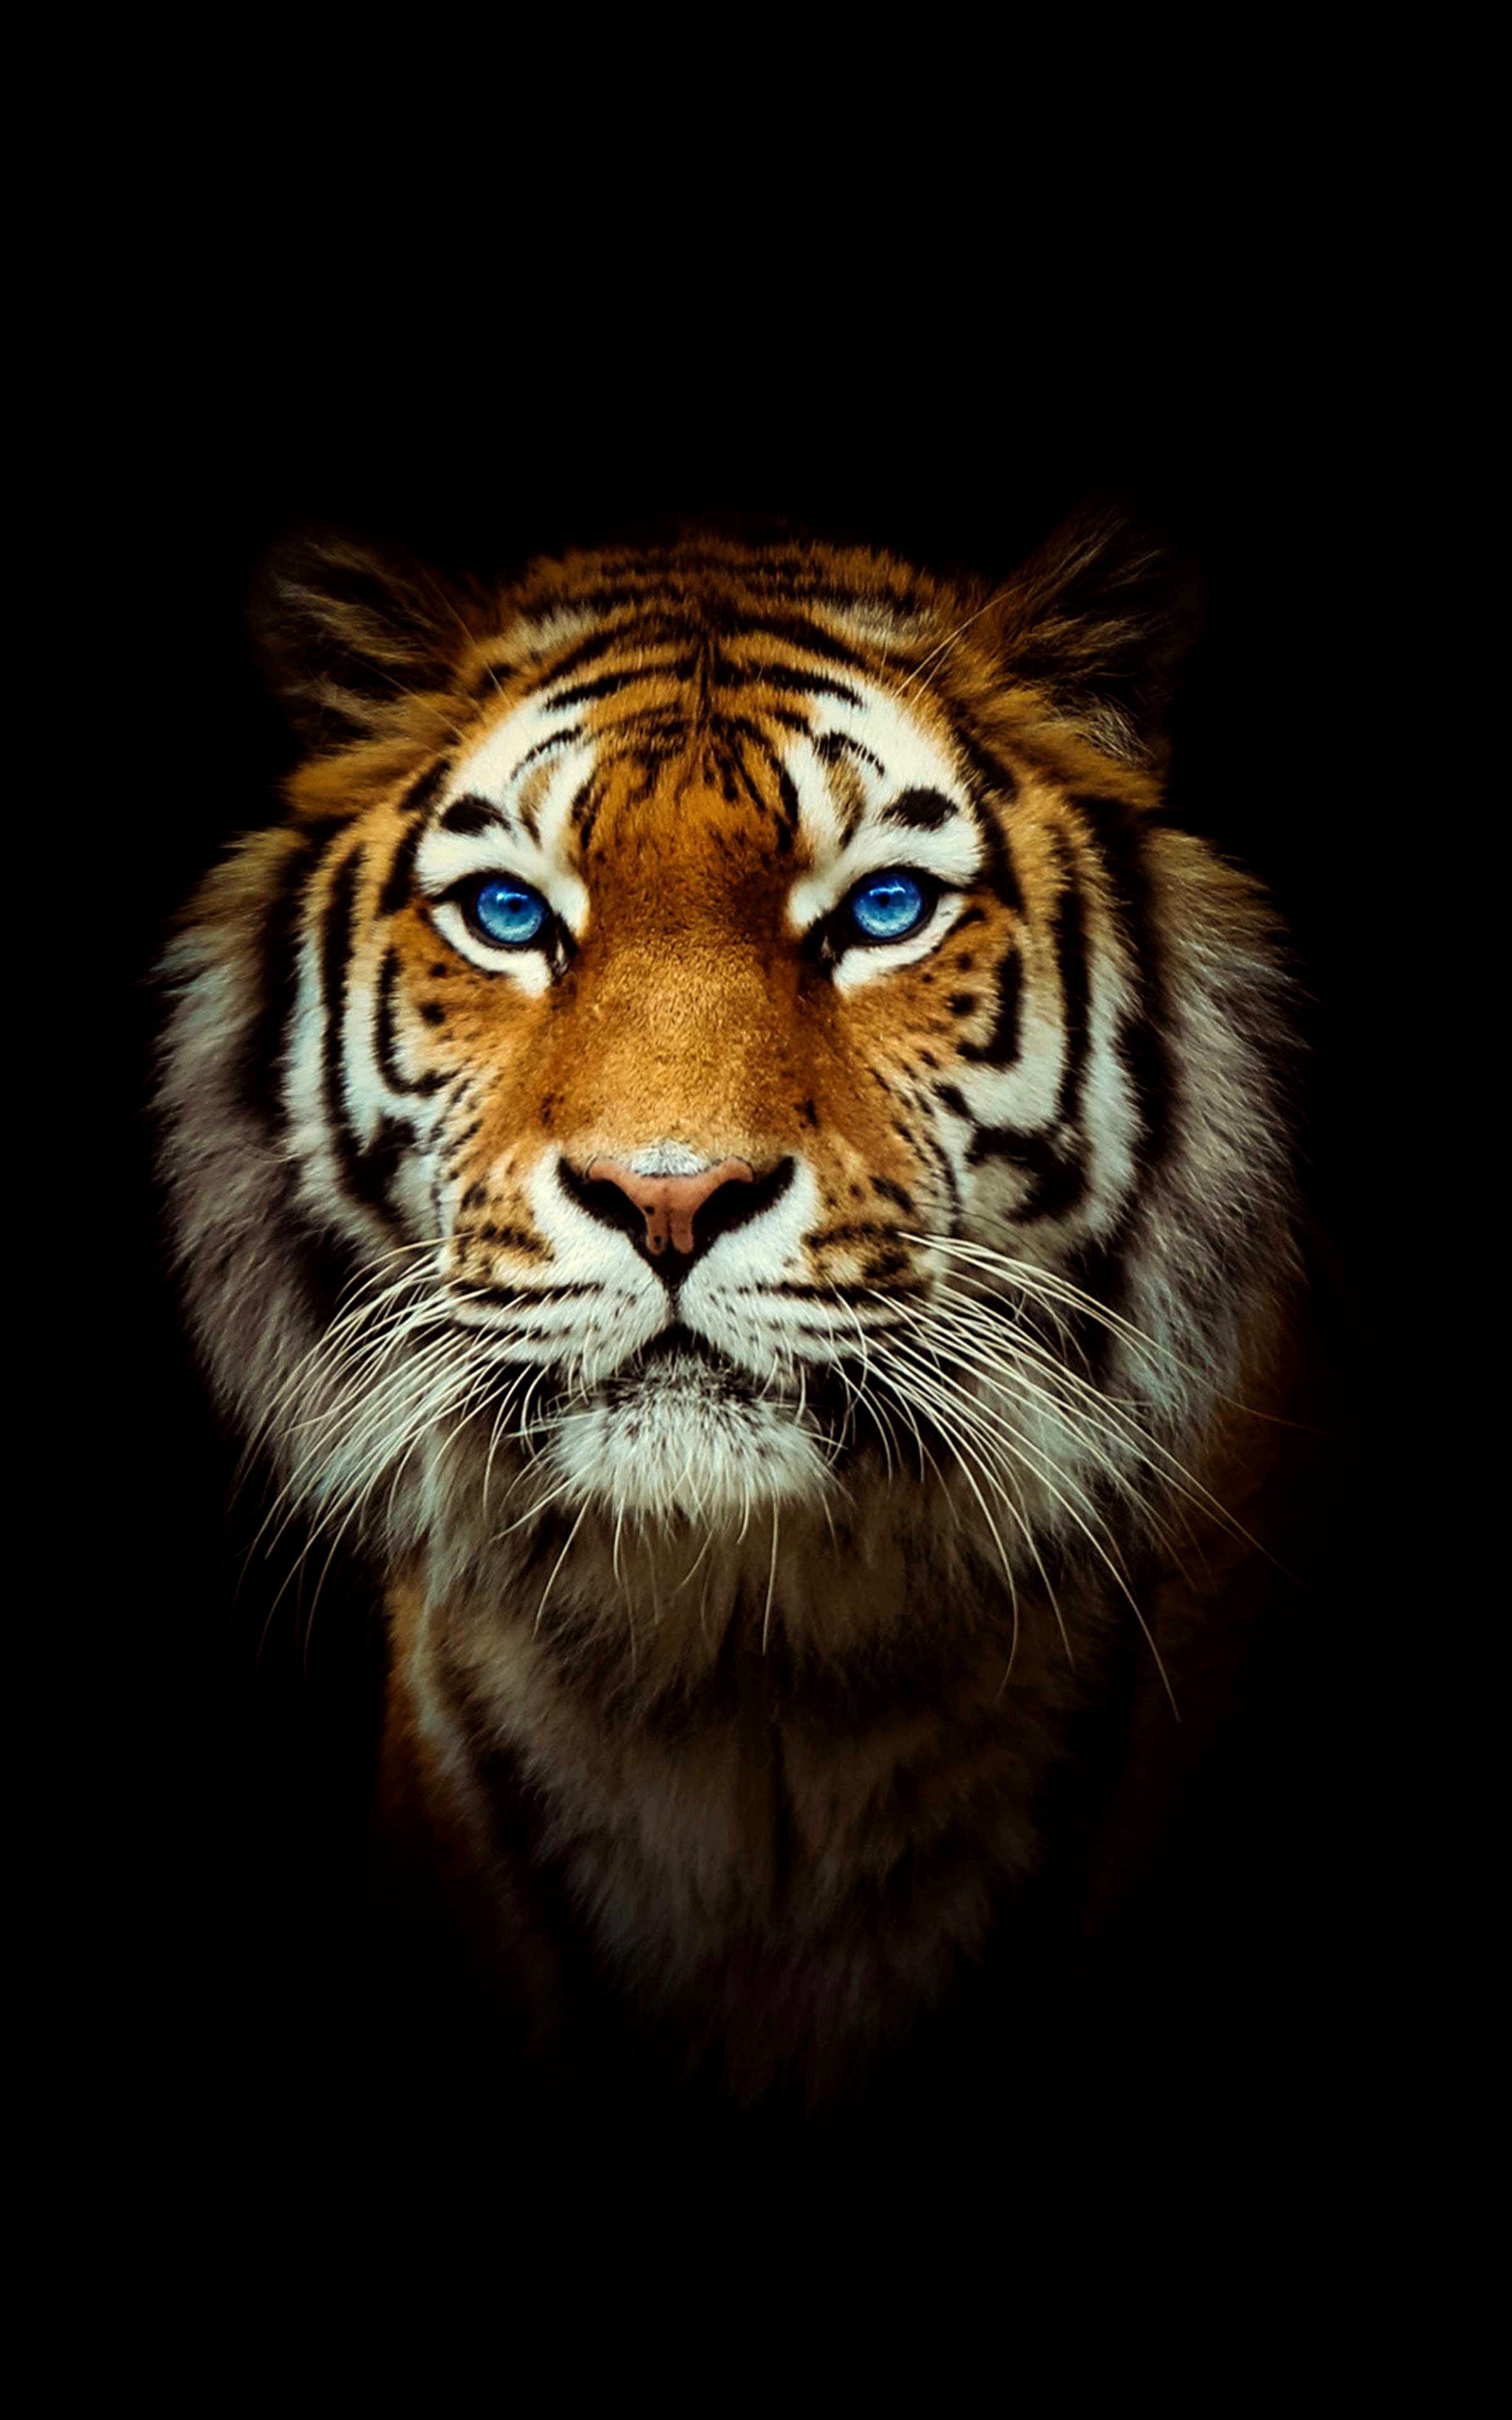 Hd Tiger Background Images HD Pictures and Wallpaper For Free Download   Pngtree